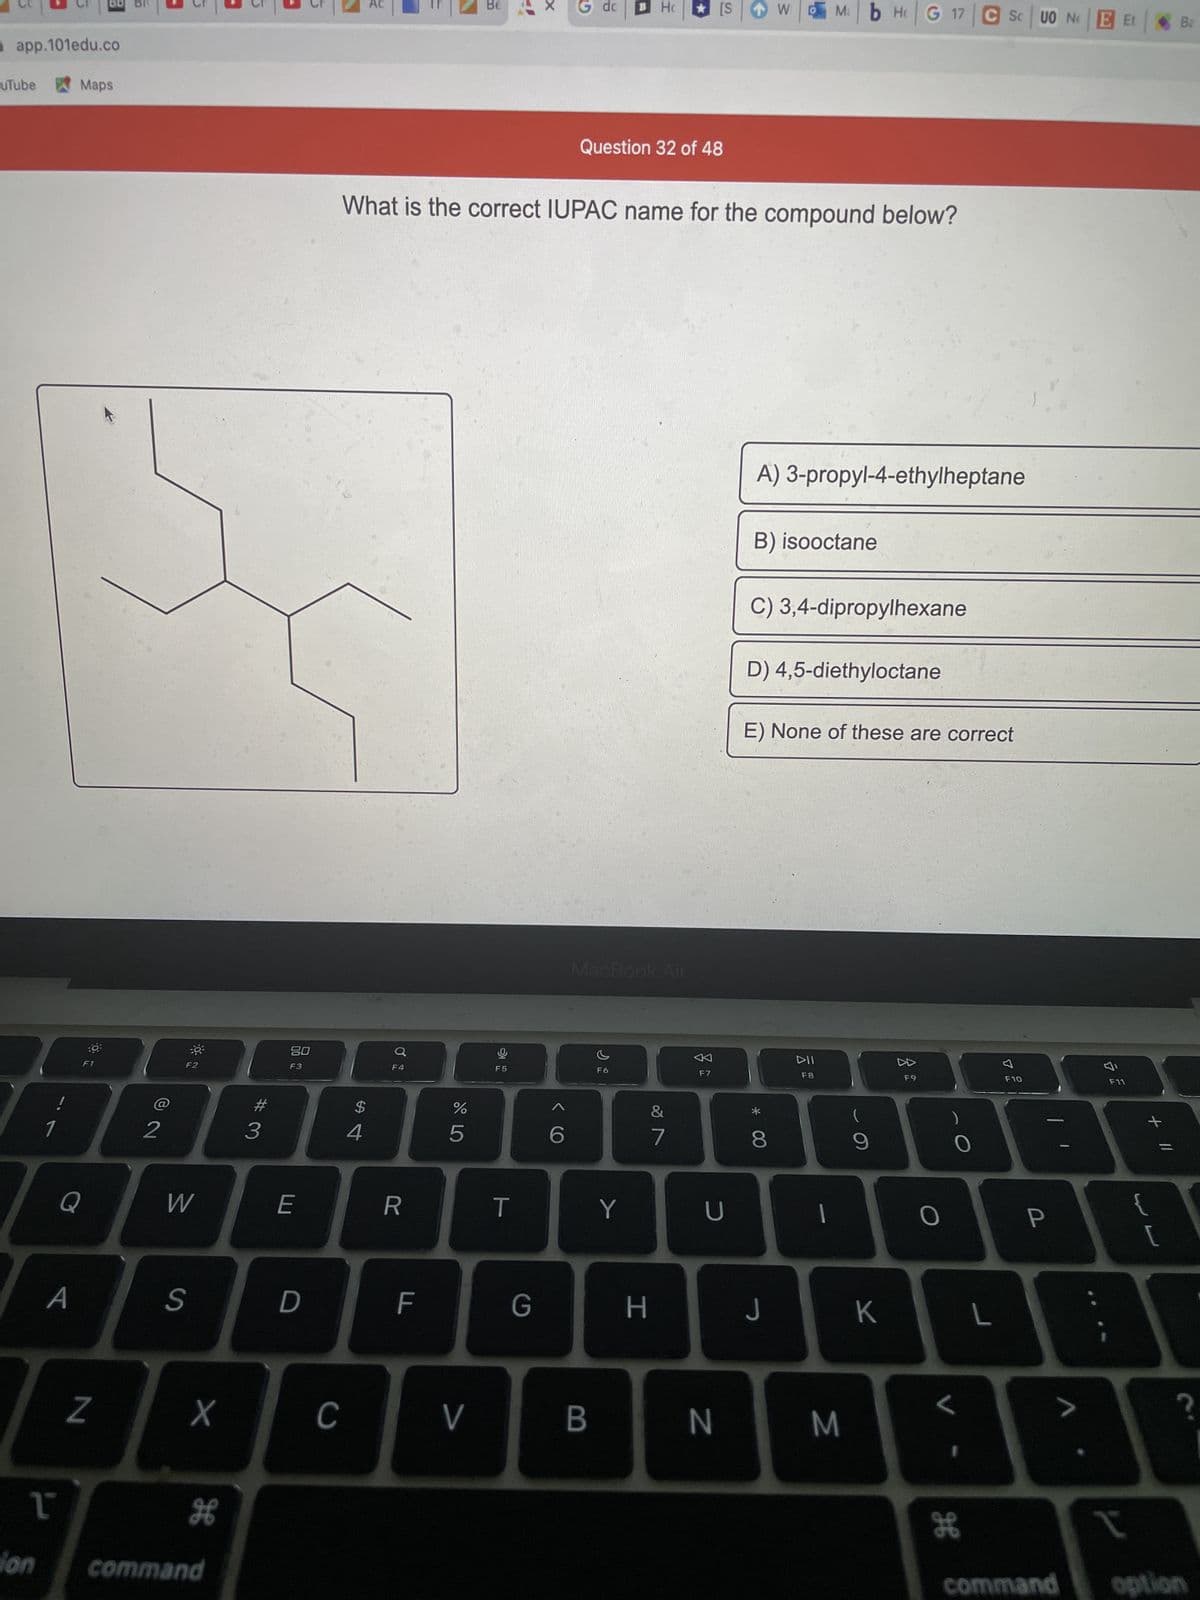 app.101edu.co
uTube
Maps
35
80
F2
F3
F4
!
1
ion
Q
A
L
N
2
W
S
X
H
5
command
#3
E
D
C
Be
dc
Ho
[S
Ma
Question 32 of 48
What is the correct IUPAC name for the compound below?
$
4
R
F
do 5
%
V
F5
-4
T
X
G
D
6
MacBook Air
F6
Y
7
F7
U
H
BN
W
*
A) 3-propyl-4-ethylheptane
B) isooctane
C) 3,4-dipropylhexane
D) 4,5-diethyloctane
E) None of these are correct
▷▷
F9
DII
F8
8
T
J
M
(
9
HG 17 C Sc UO NO
K
)
O
L
H
7
L
F10
[
{T
A
?
1
command option
Et
P
F11
+ 11
WL
Ba